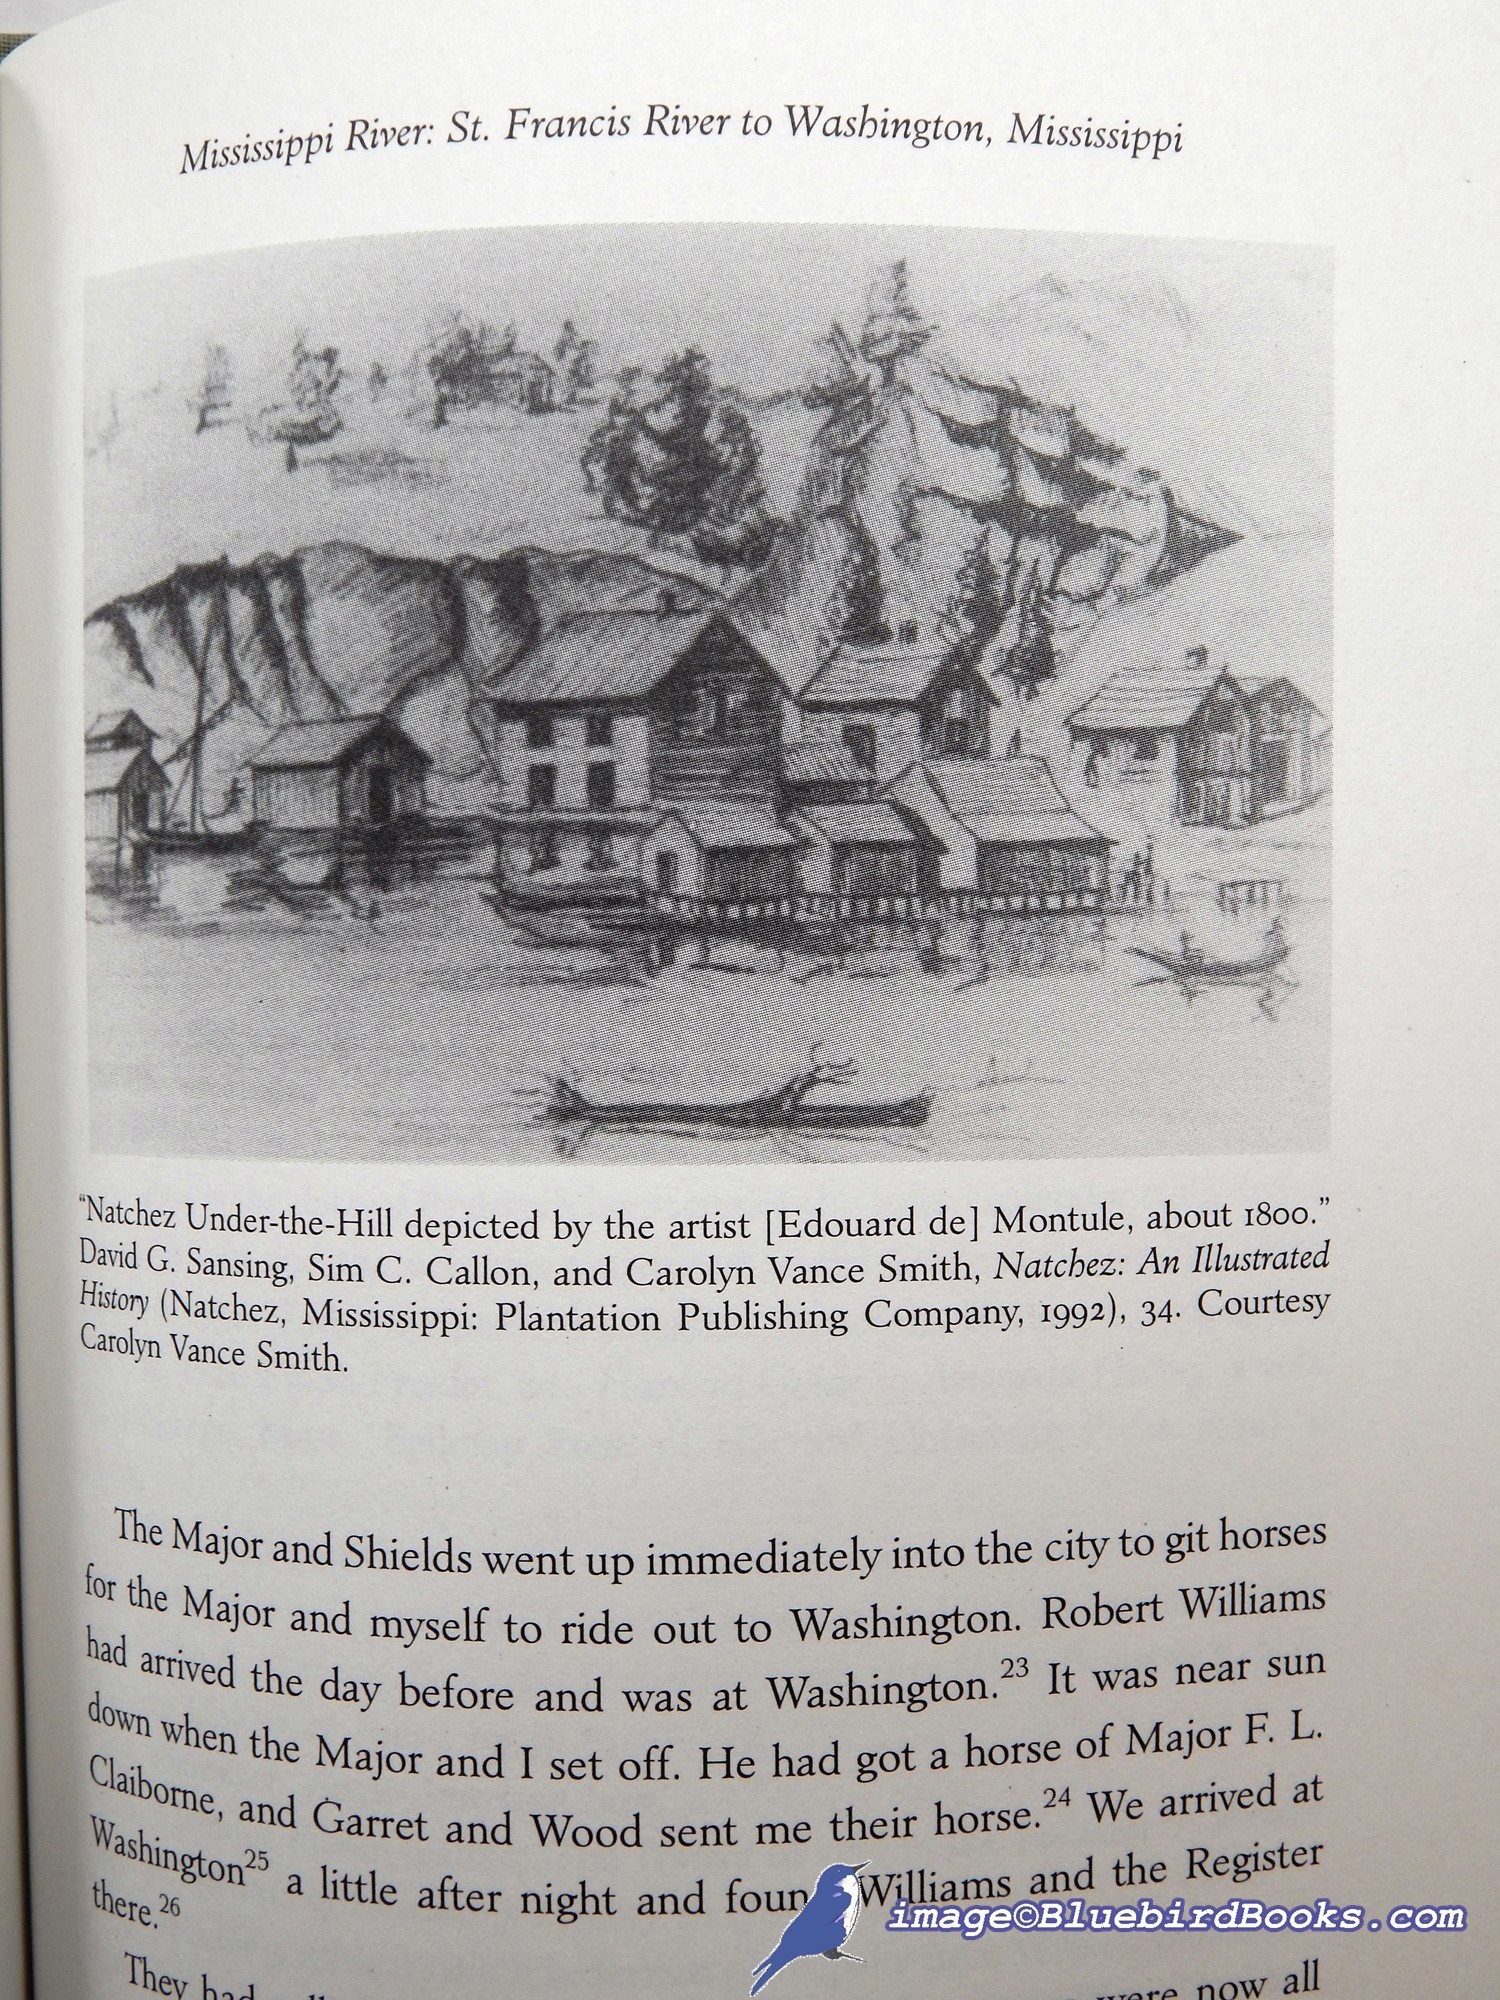 RODNEY, THOMAS; SMITH, DWIGHT L; SWICK, RAY (EDITORS) - A Journey Through the West: Thomas Rodney's 1803 Journal from Delaware to the Mississippi Territory